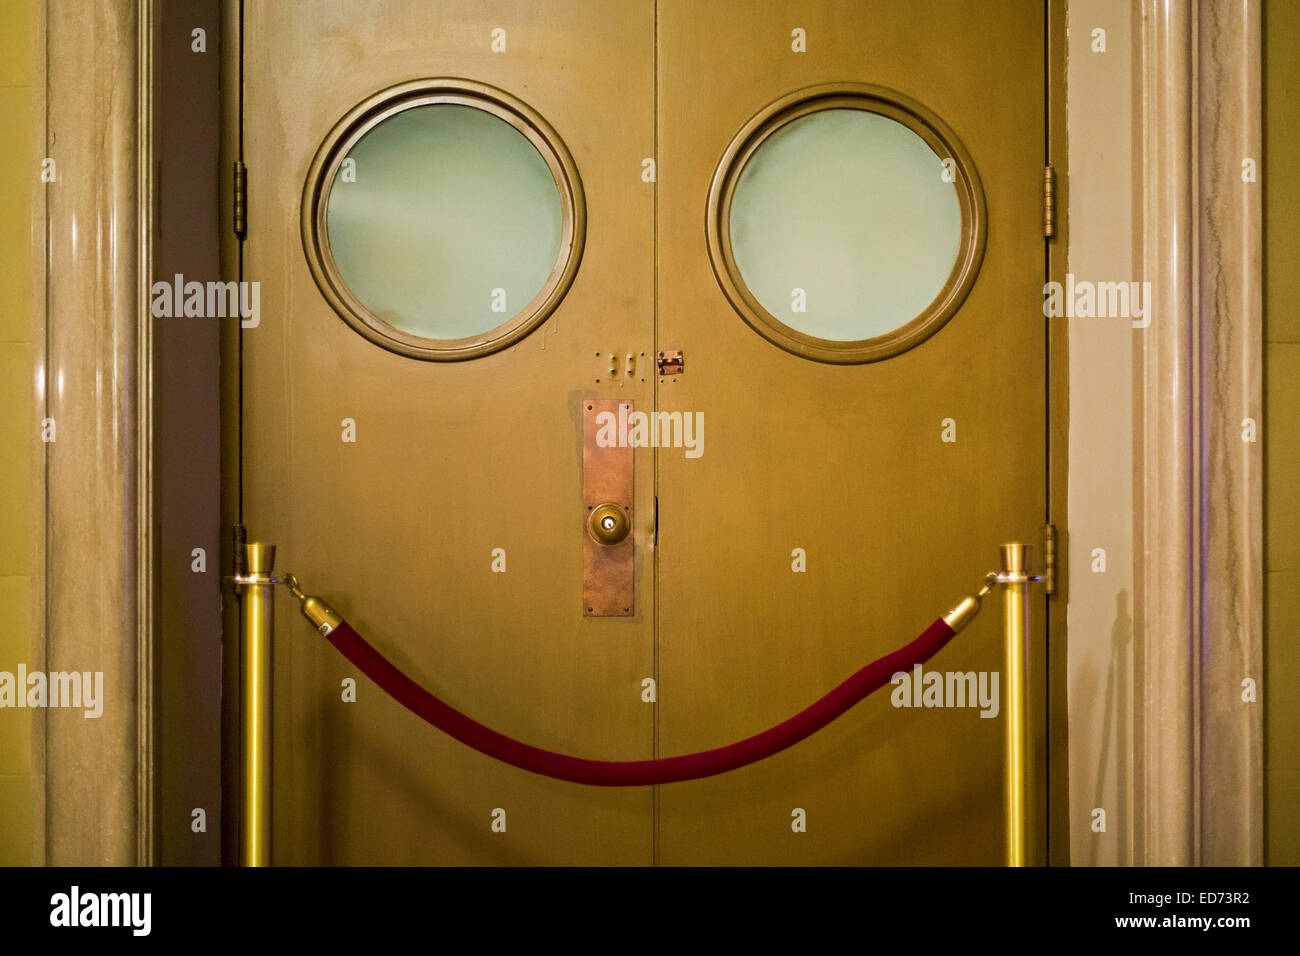 Detroit, Michigan - A happy face on a door at the Detroit Institute of Arts. Stock Photo